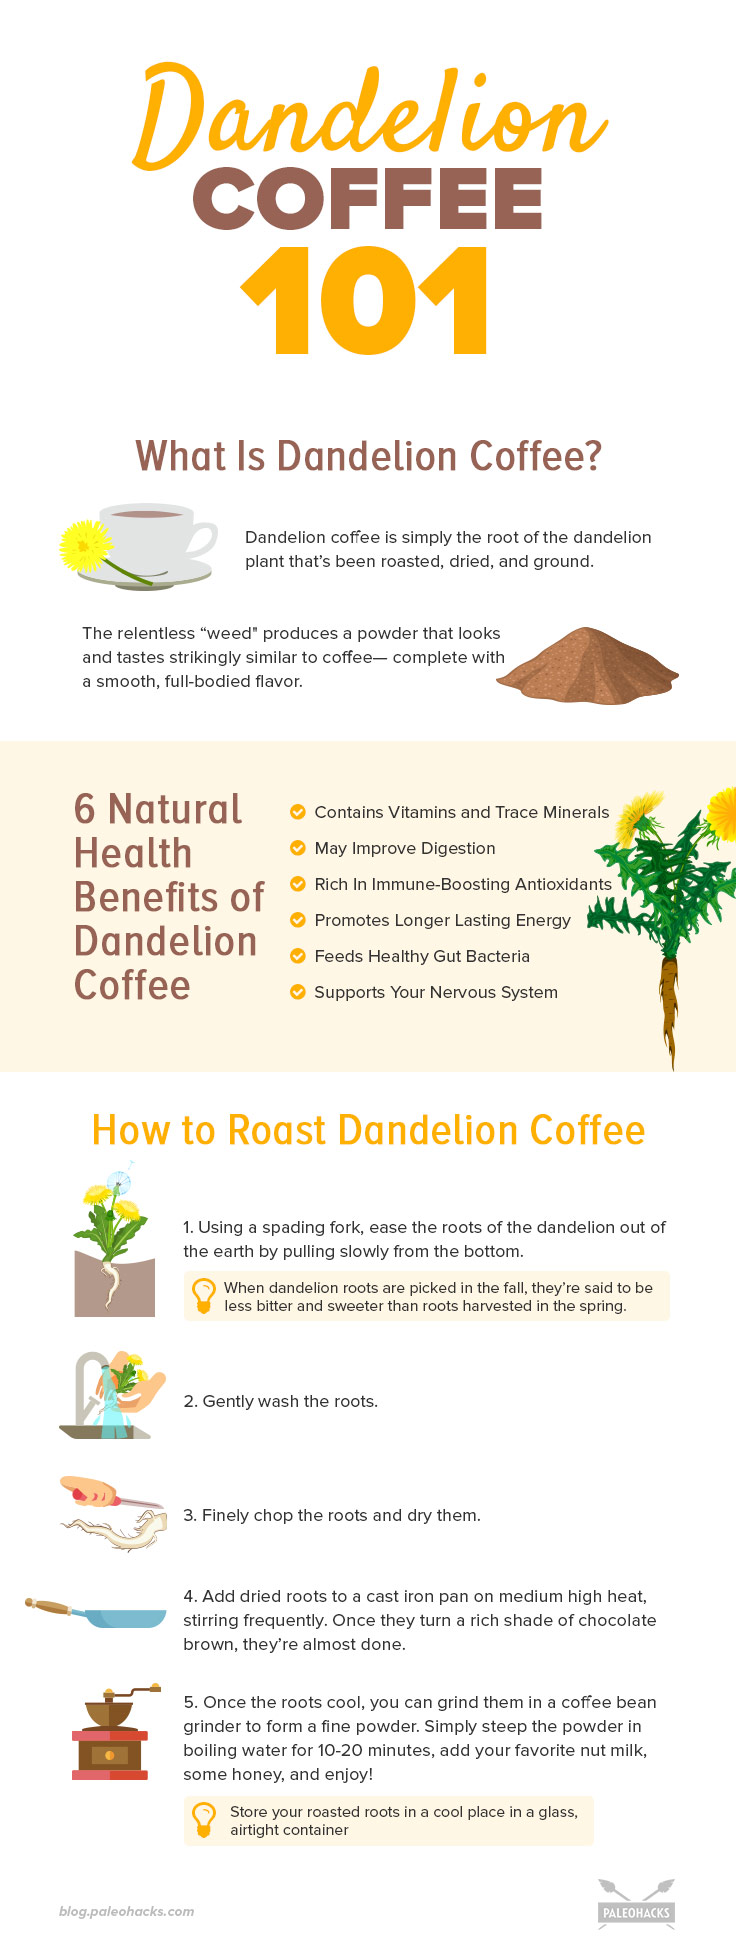 Coffee can be a tough habit to break. Next time you weed your garden, save the dandelions to create this natural coffee full of health benefits!